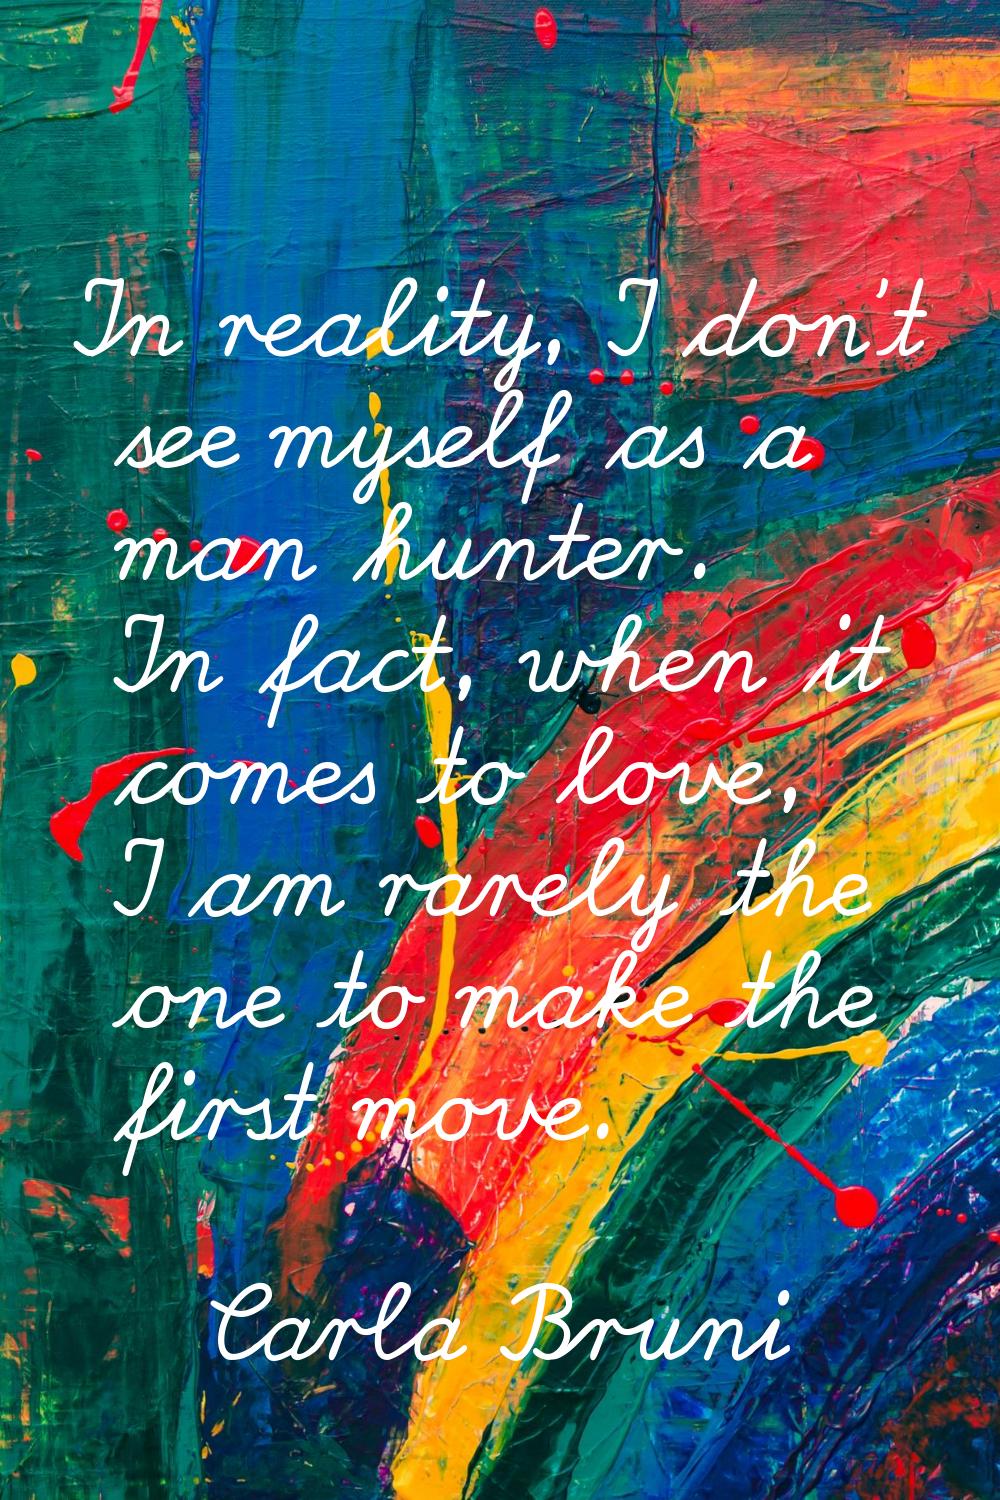 In reality, I don't see myself as a man hunter. In fact, when it comes to love, I am rarely the one